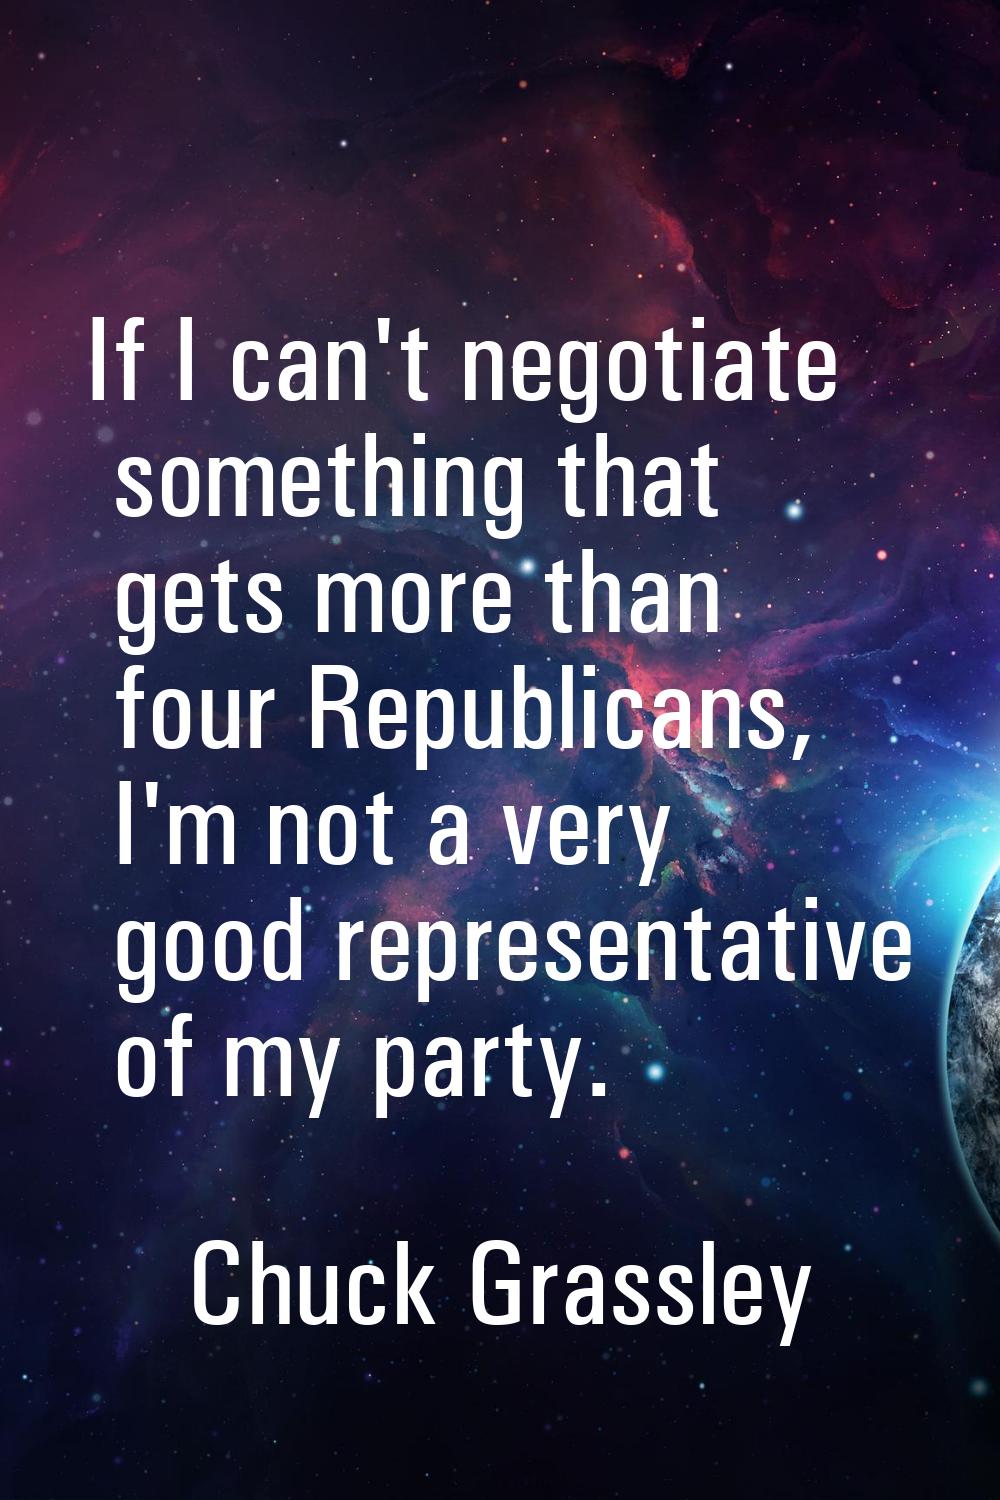 If I can't negotiate something that gets more than four Republicans, I'm not a very good representa